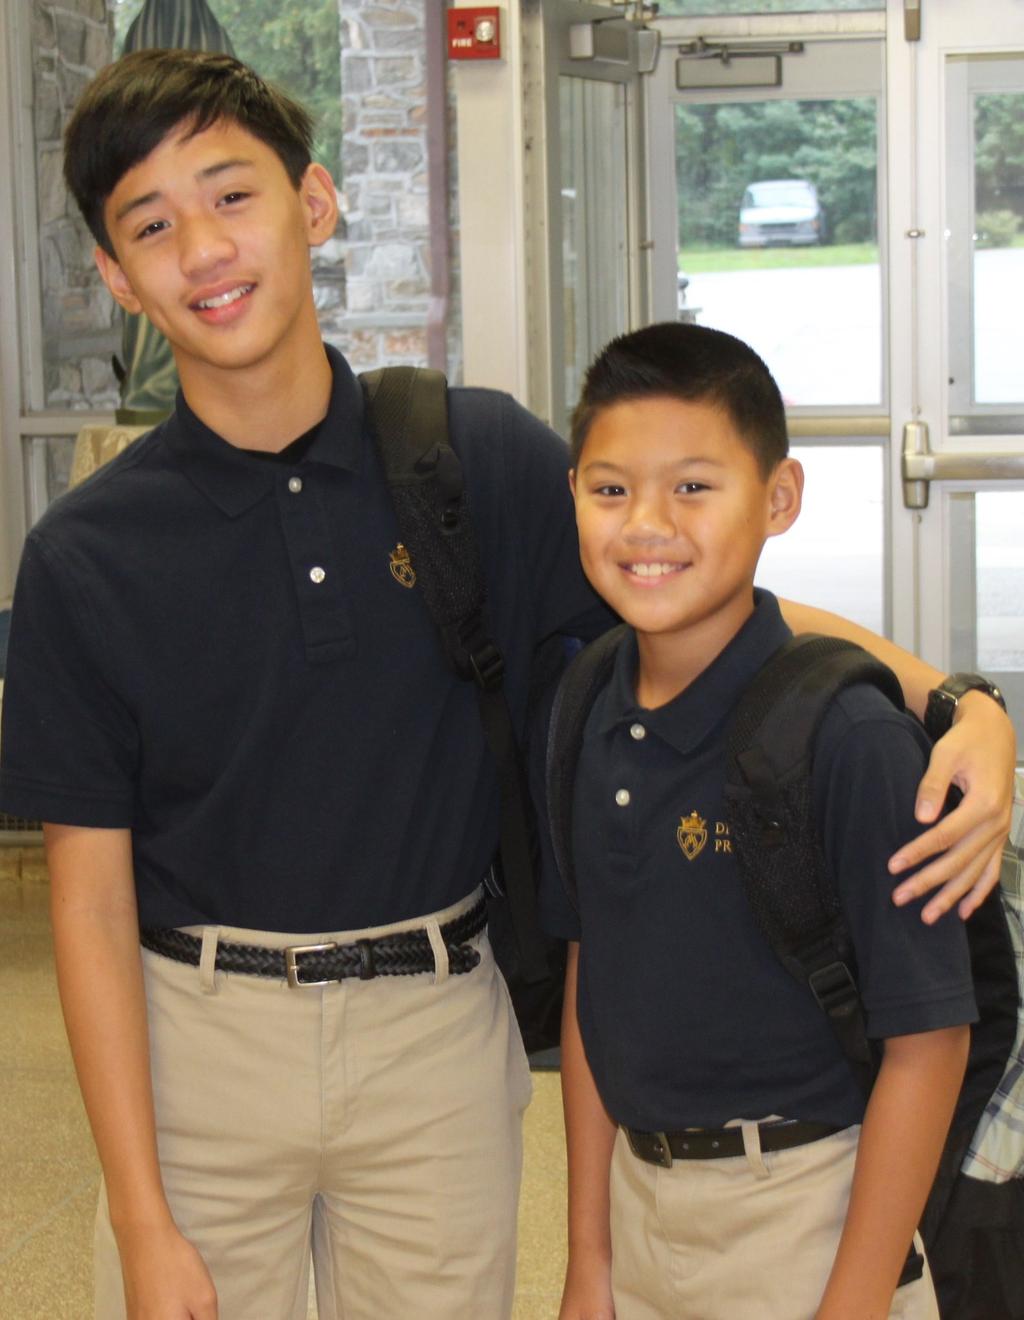 DEVON PREPARATORY SCHOOL GRADES 6 12 Devon Prep is an independent, Catholic, college preparatory school for young men in grades six through twelve, conducted by the Piarist Fathers.